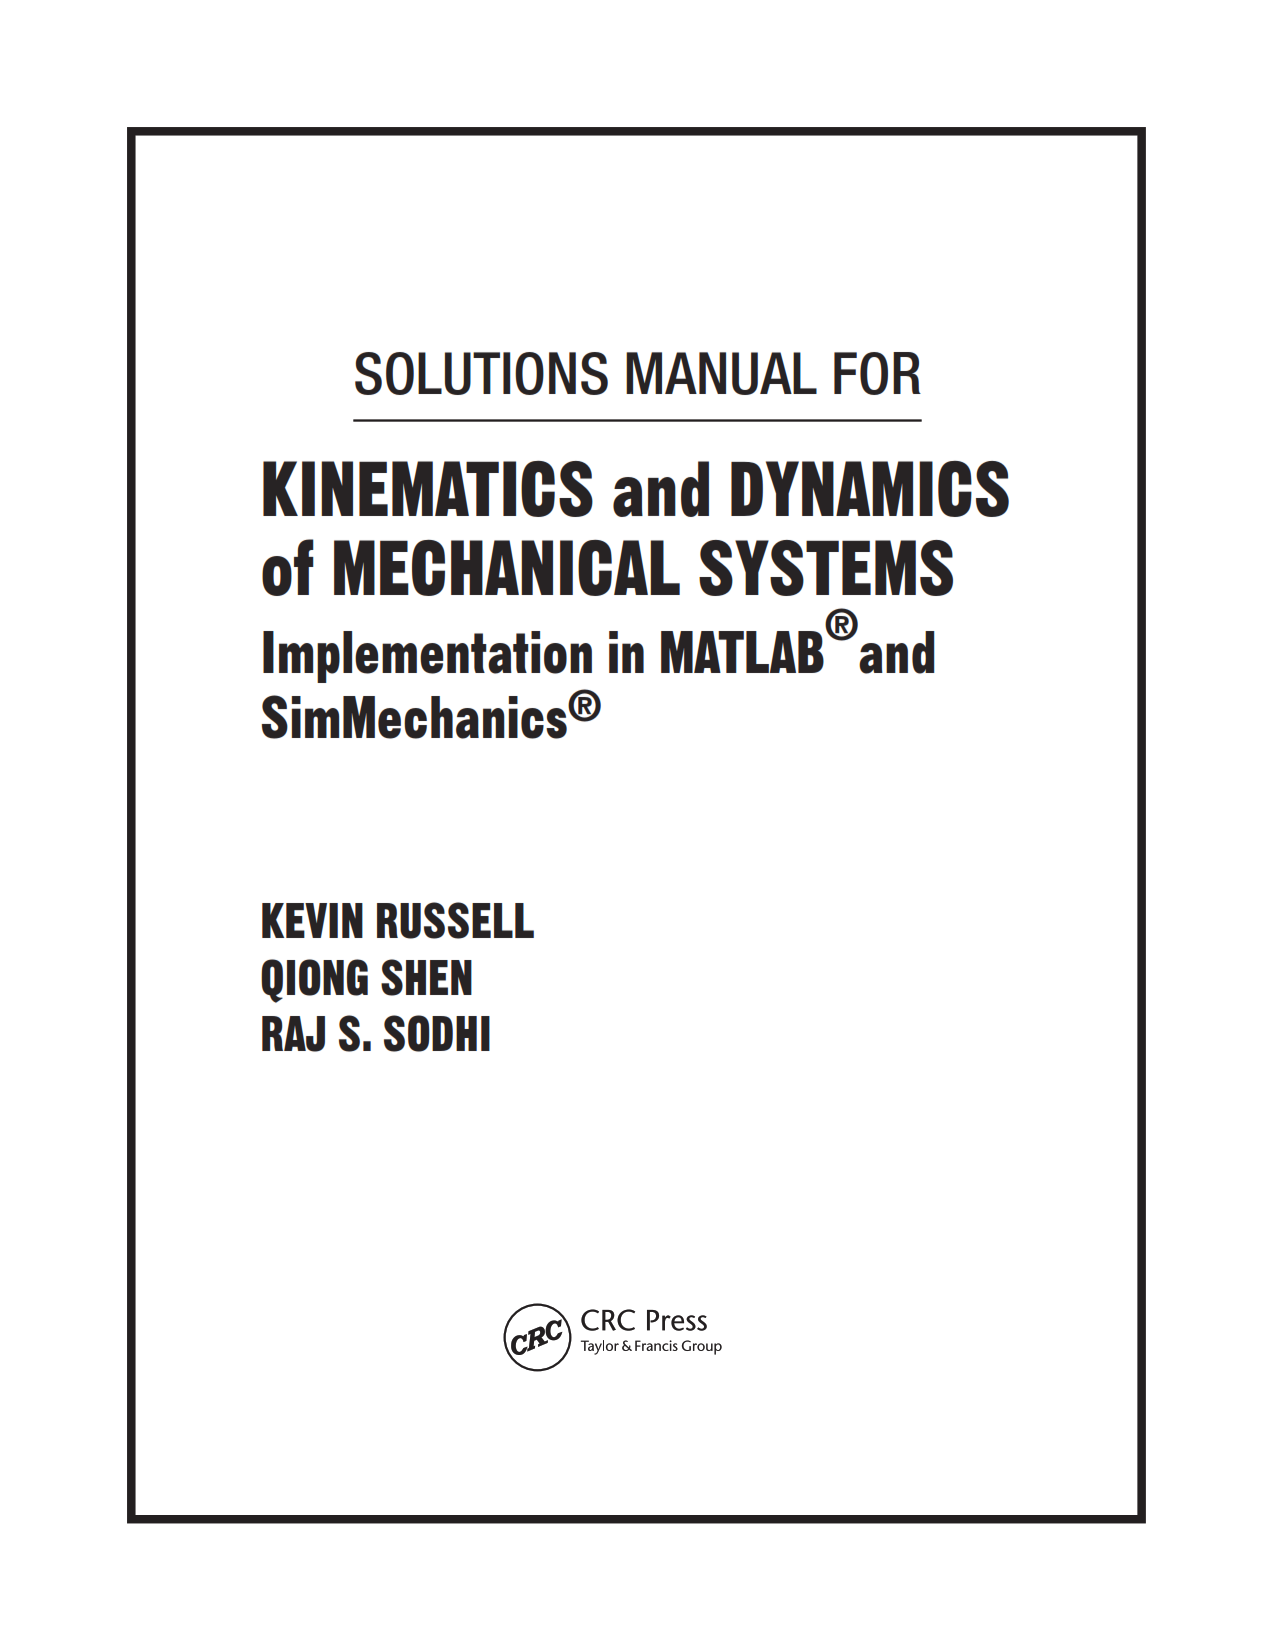 Kinematics and dynamics of mechanical systems implementation in Matlab and Simmechanics second ( 2nd ) edition solutions manual Kevin Russell